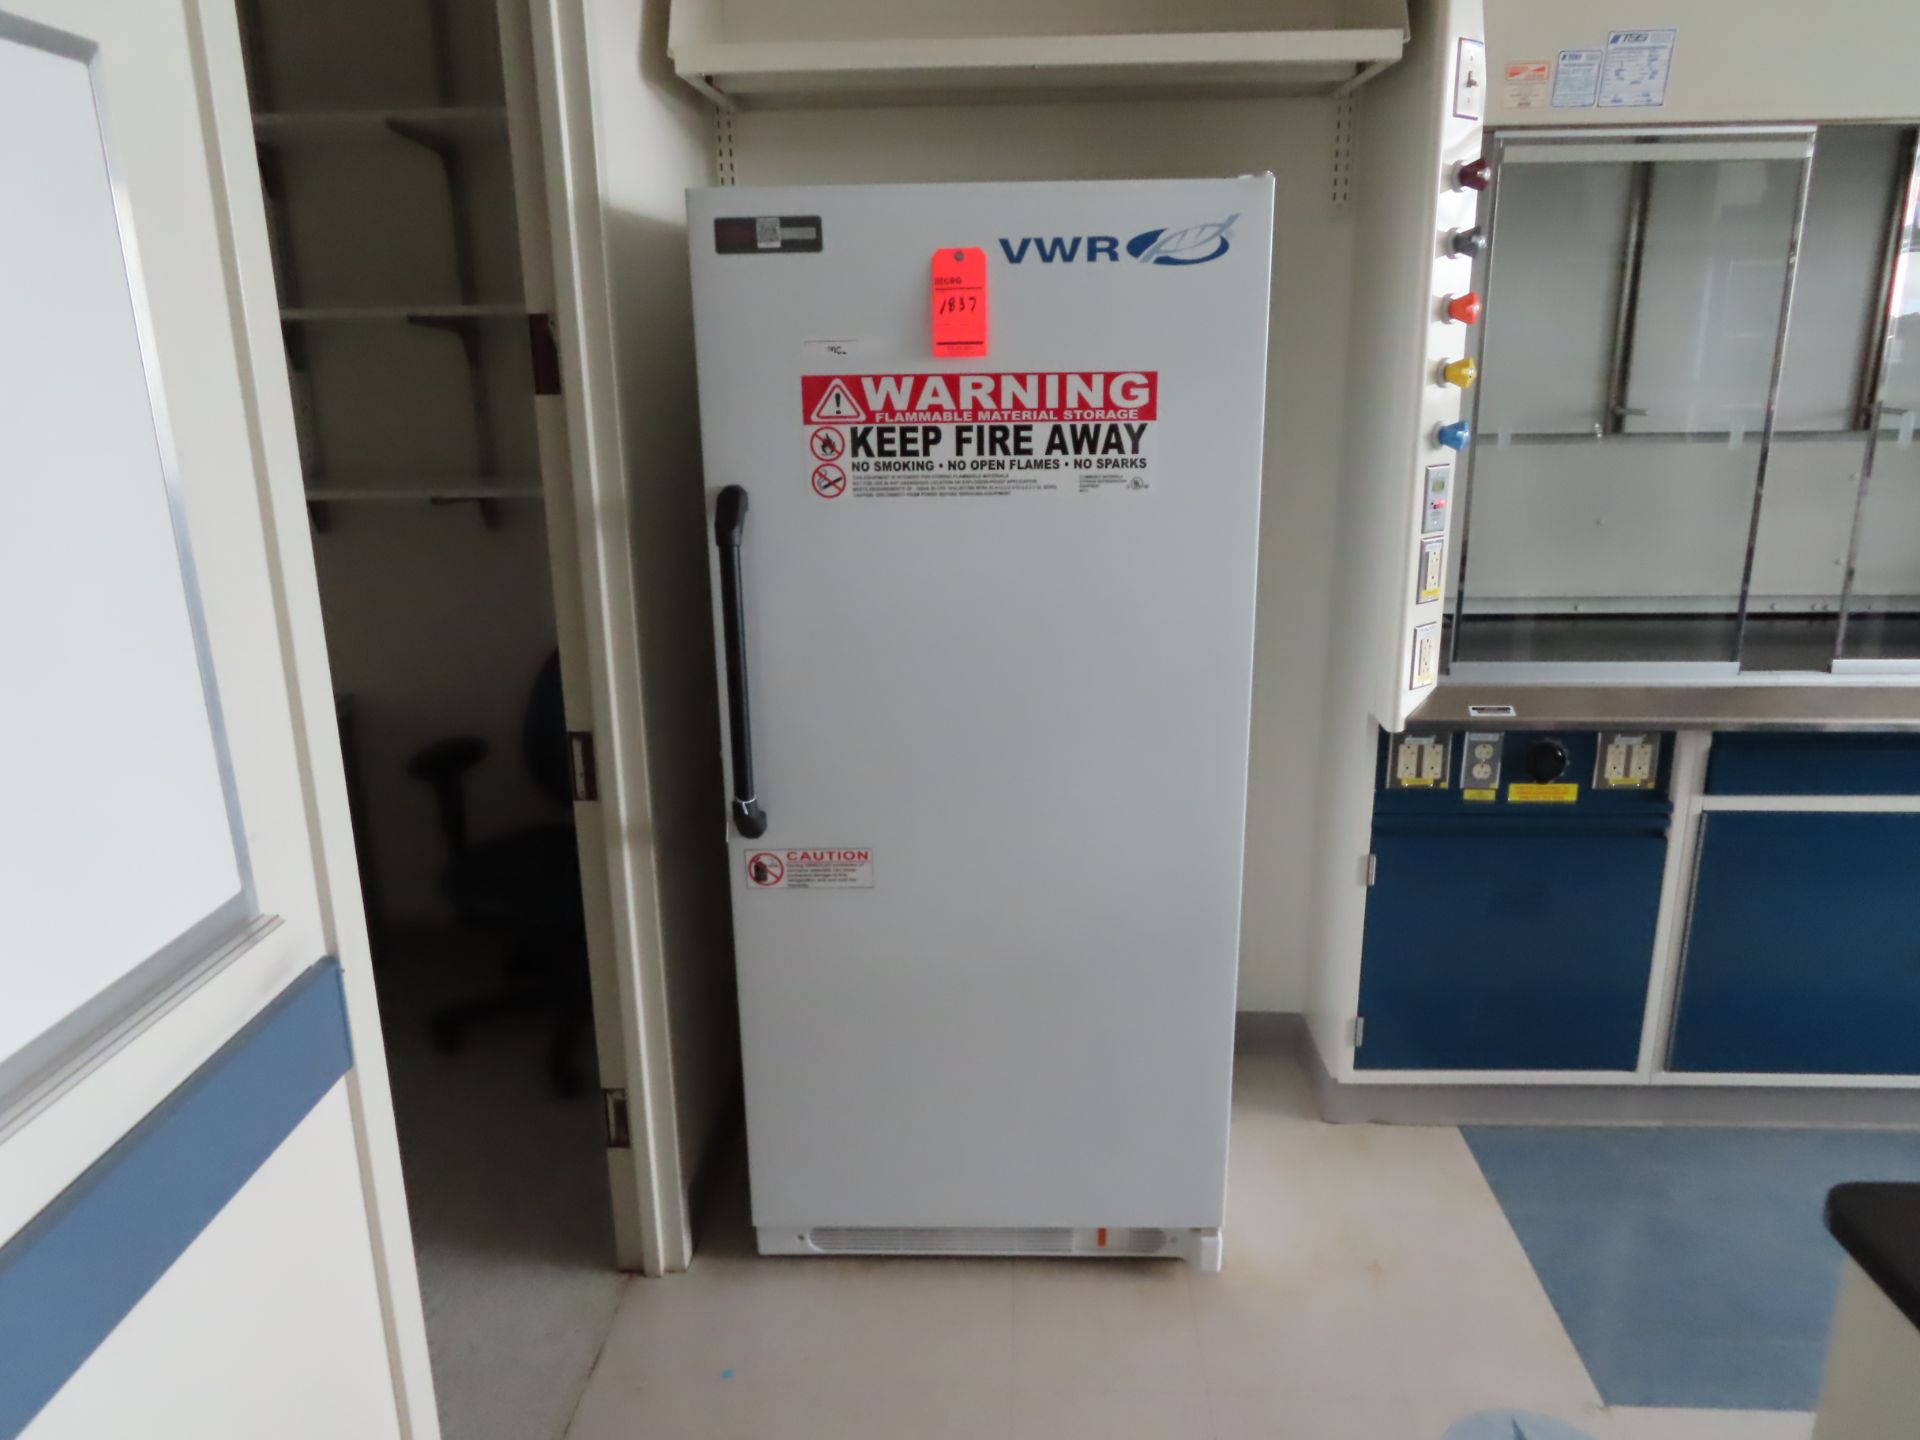 VWR flammable materials storage refrigerator, located in B wing, 4th floor, room 435E